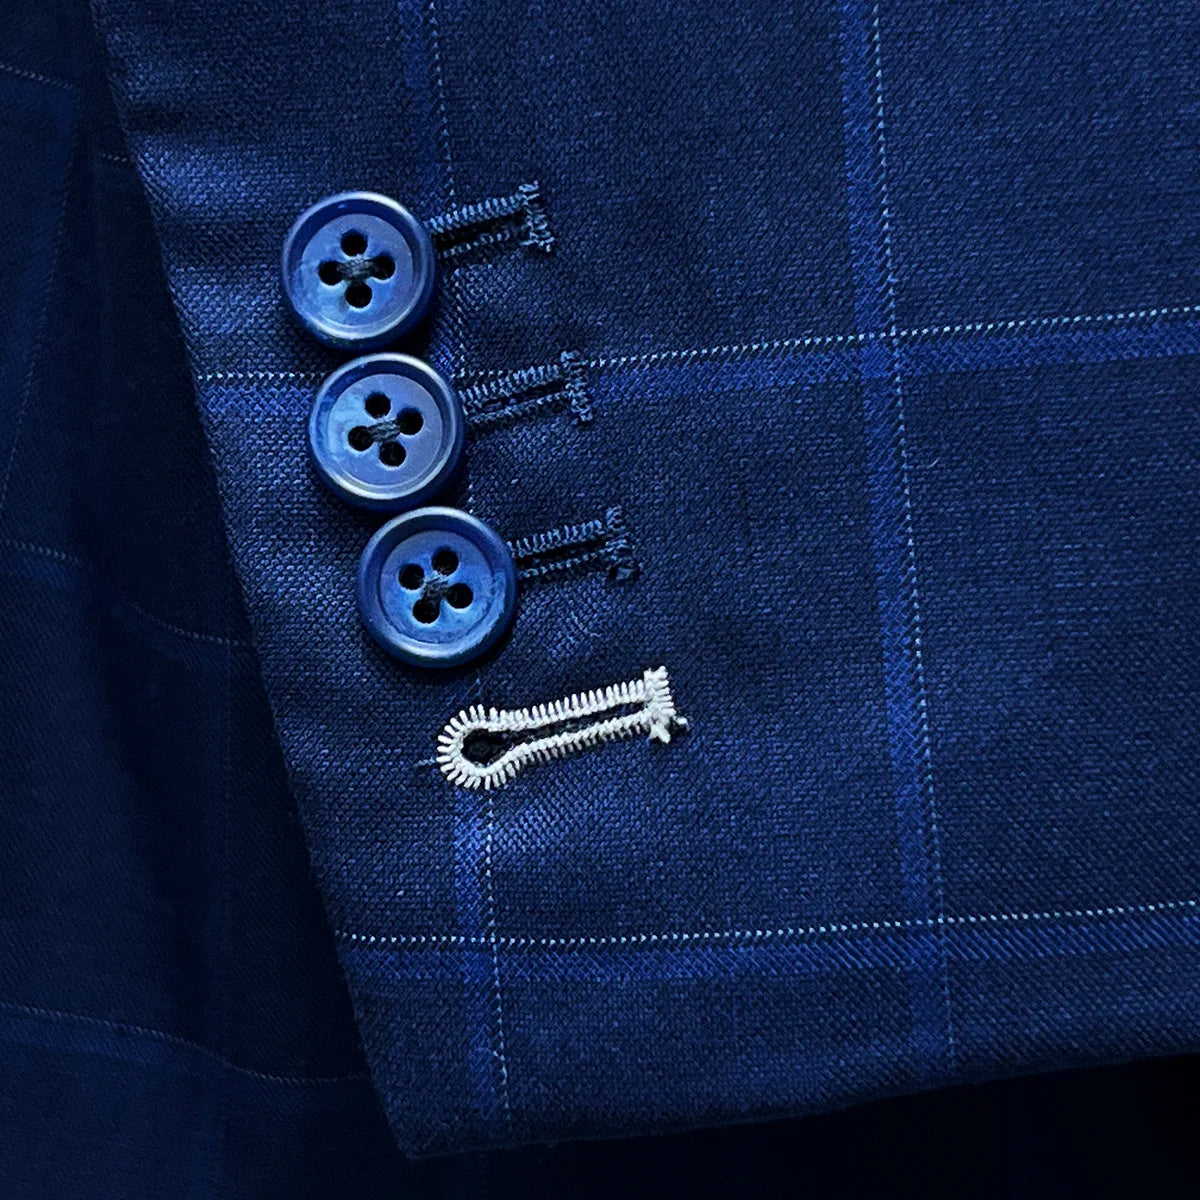 Close-up of the functional sleeve buttonholes with white contrast stitching on the royal blue suit fabric.